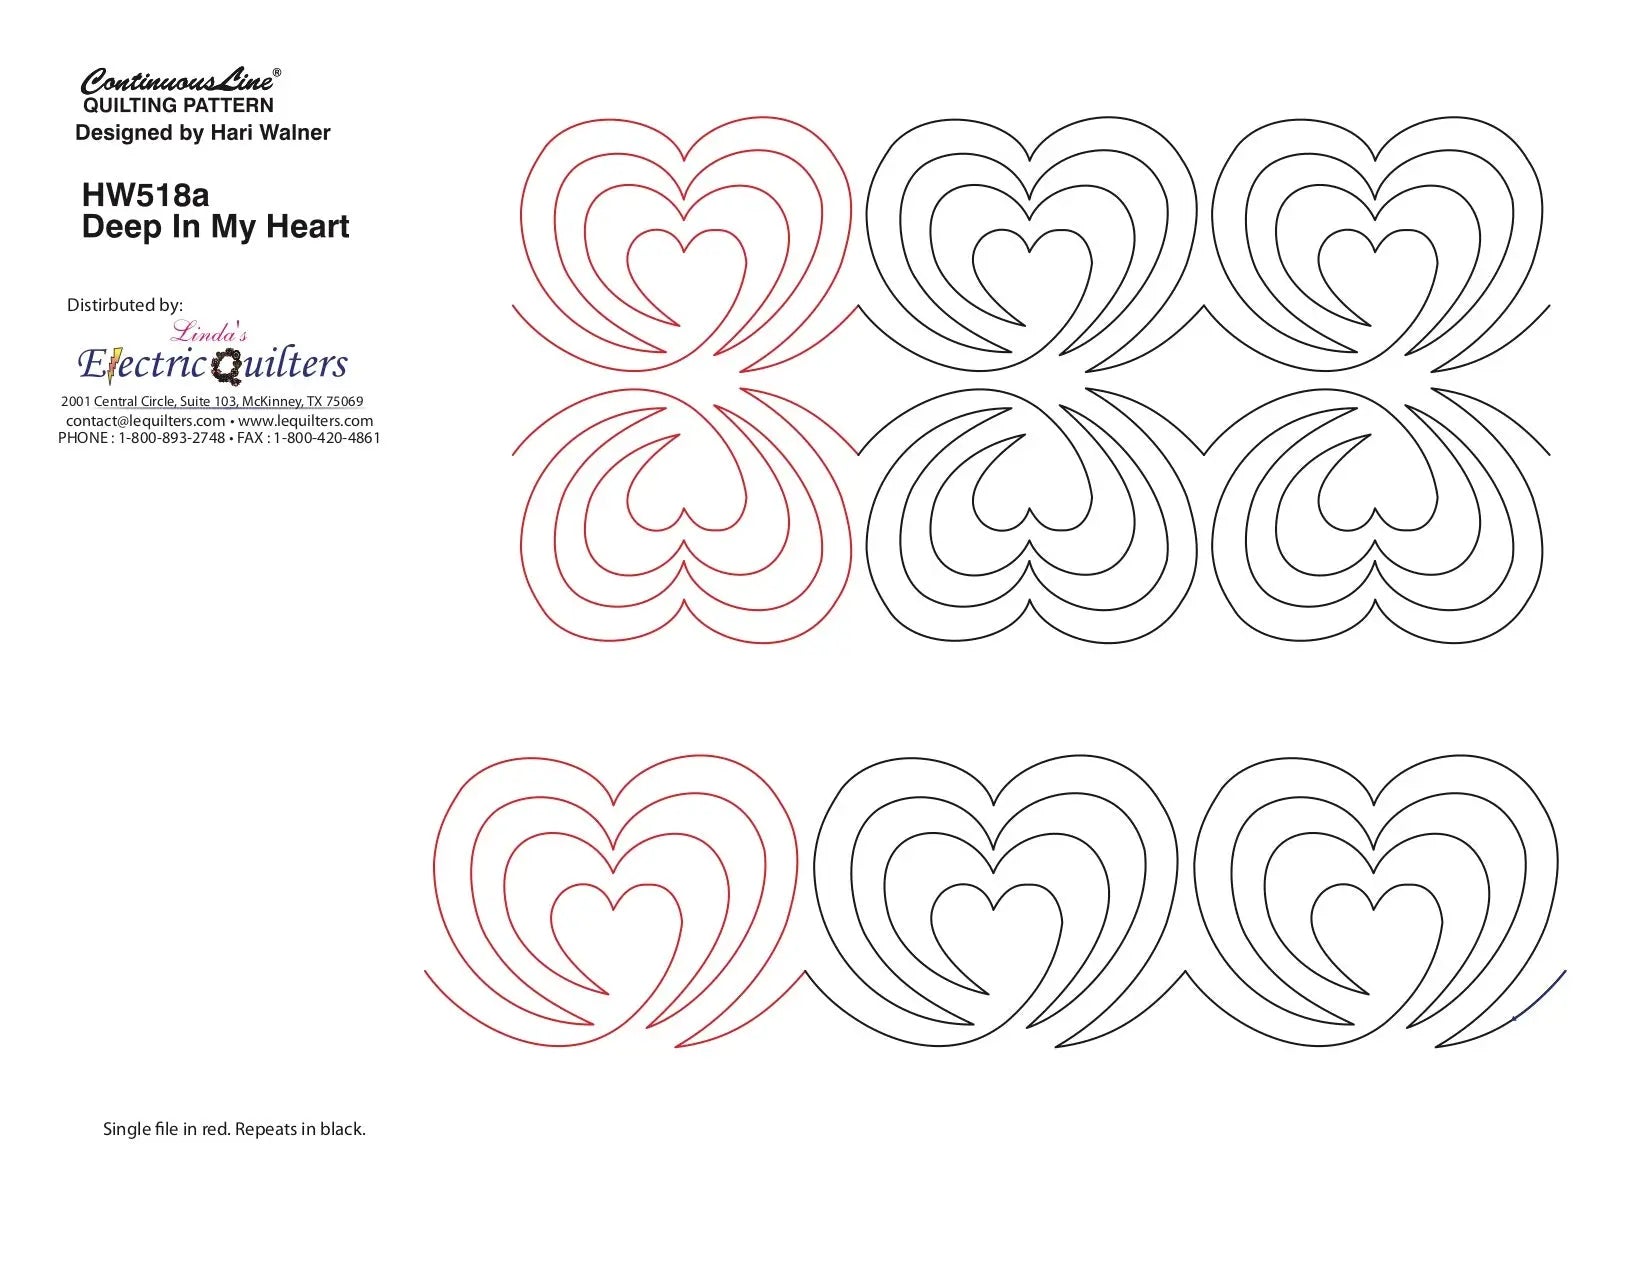 518 Deep In My Heart Pantograph by Hari Walner - Linda's Electric Quilters